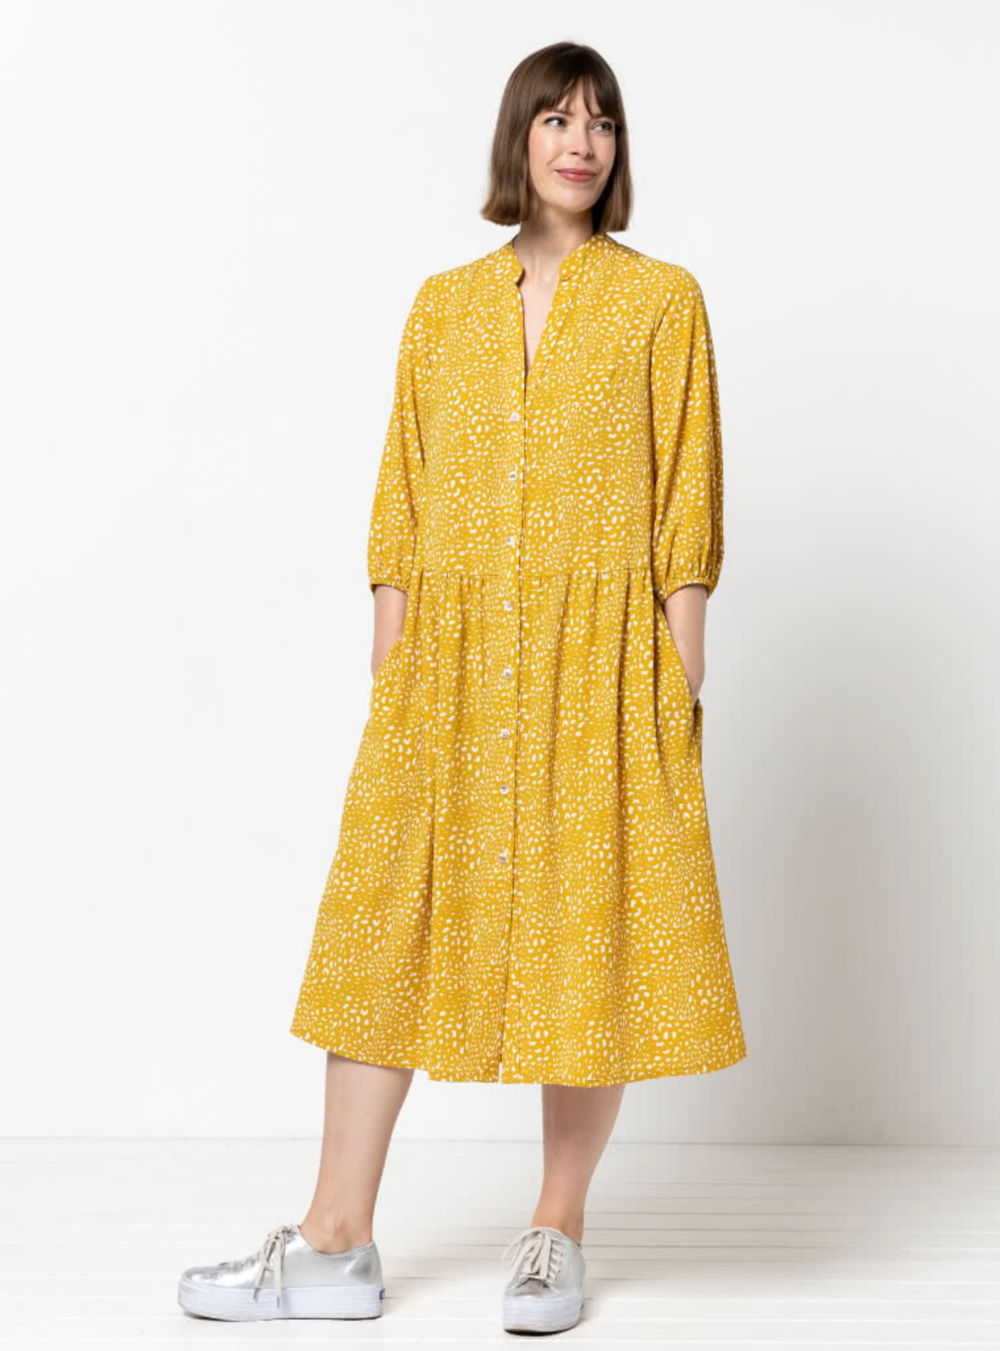 Woman wearing the Emerson Woven Dress sewing pattern from Style Arc on The Fold Line. A dress pattern made in rayon, crepe or silk fabrics, featuring a low waist, button through, mandarin collar, gathered skirt, in-seam pockets. 3/4 length sleeves with el